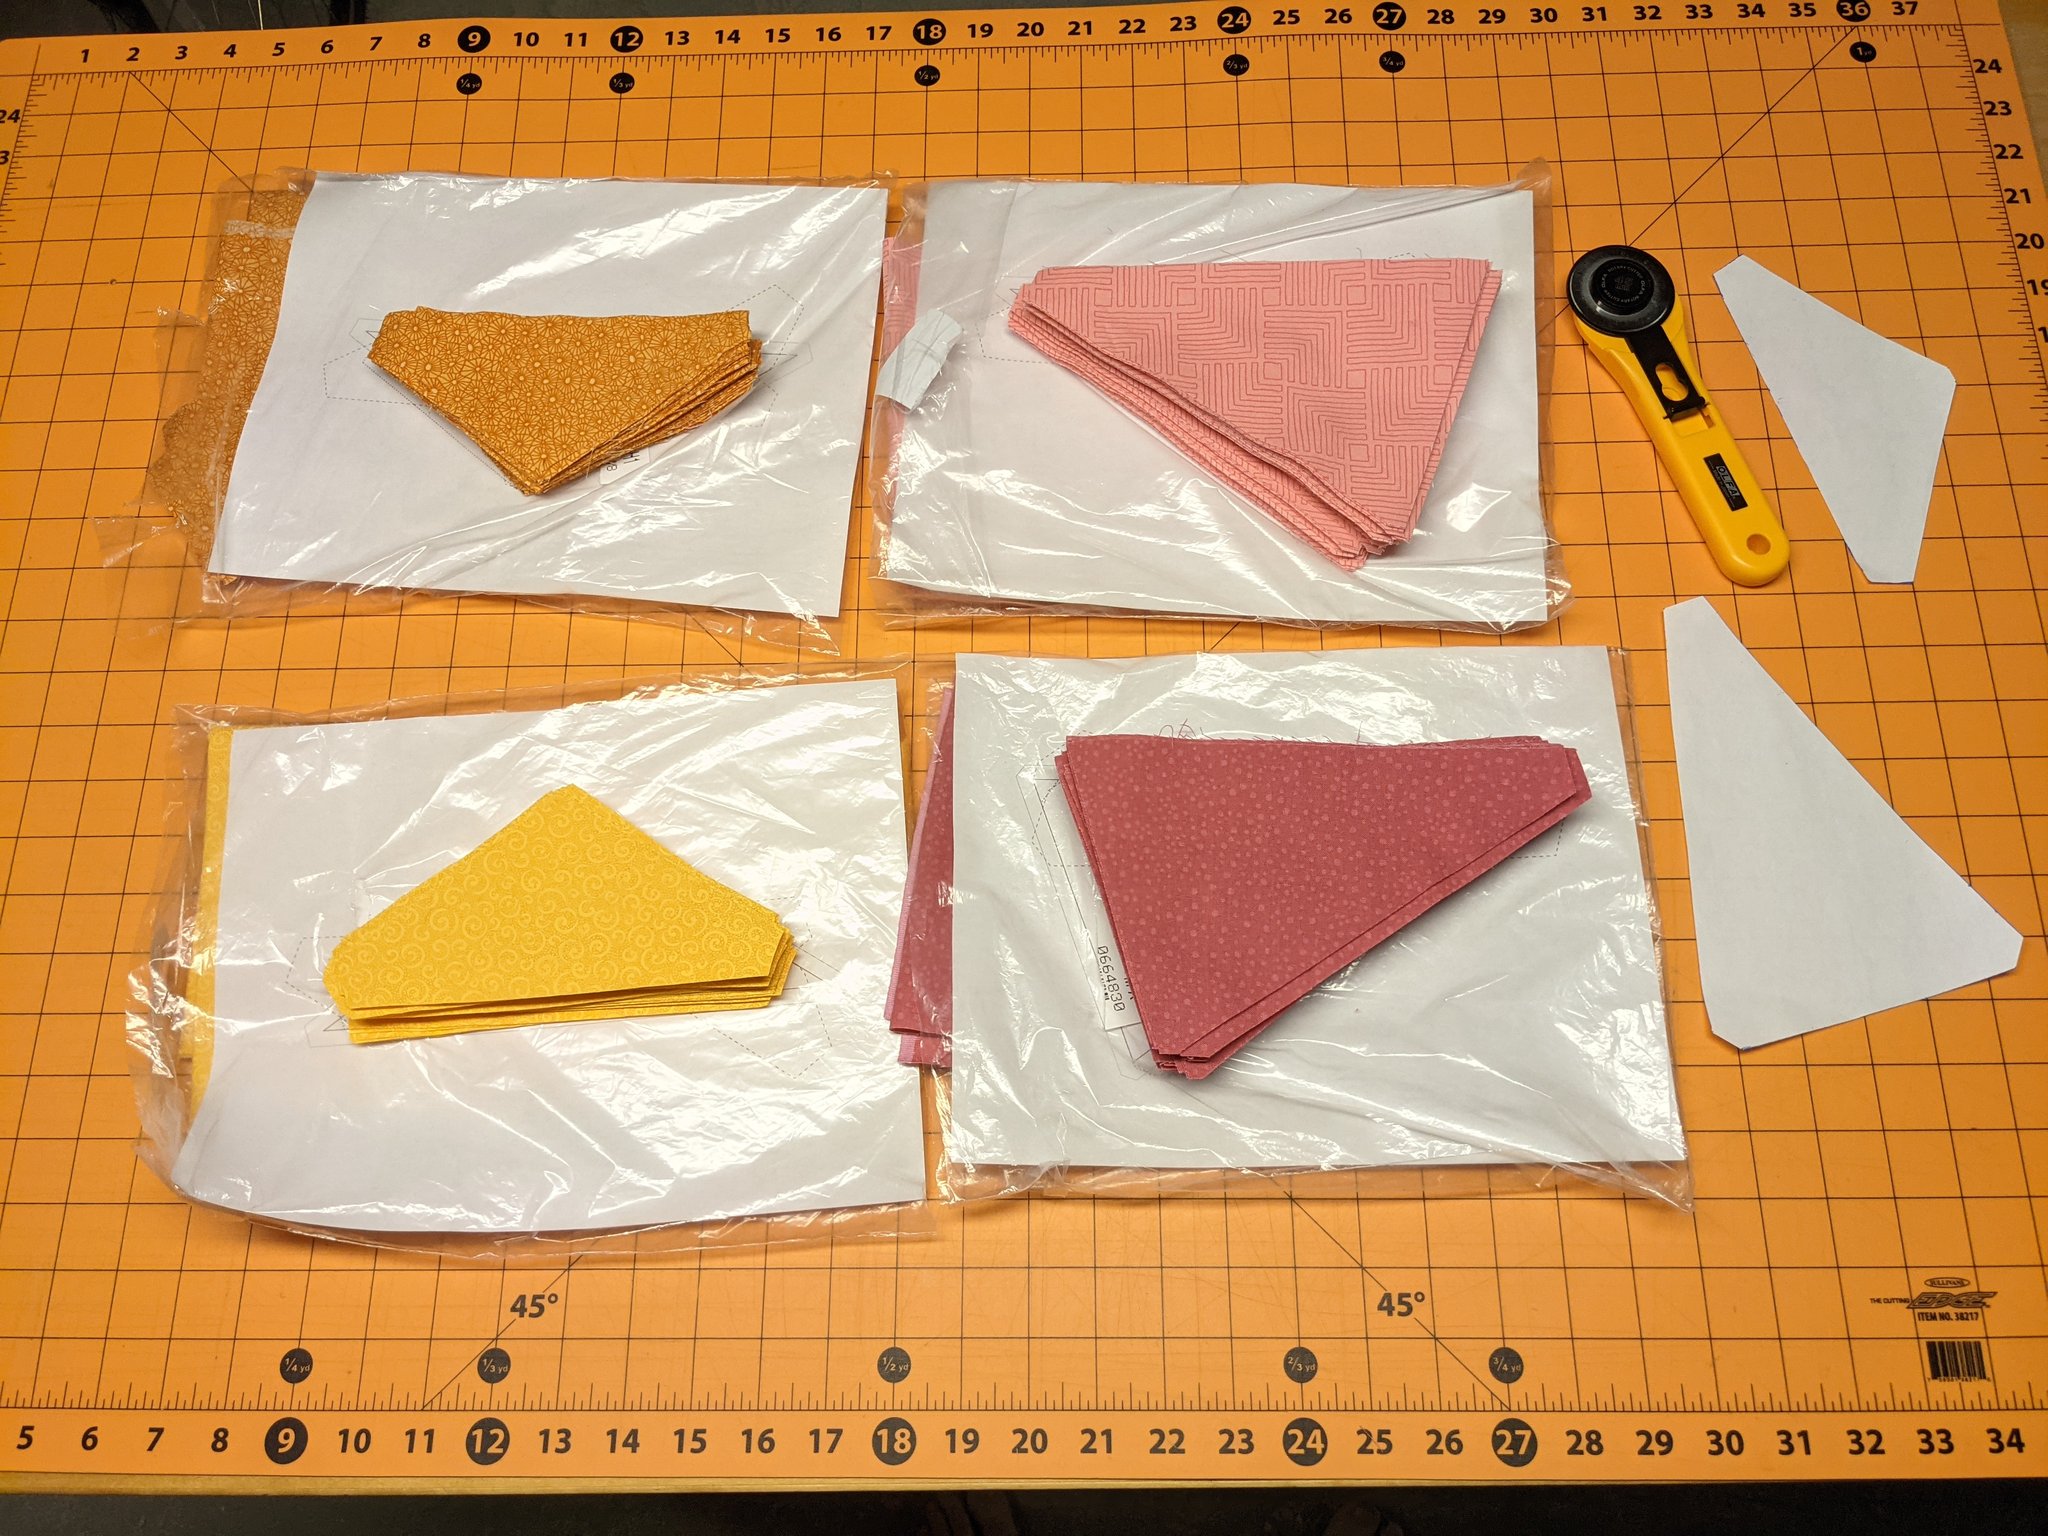 Cut-out half-tiles in orange, yellow, light pink, and dark pink